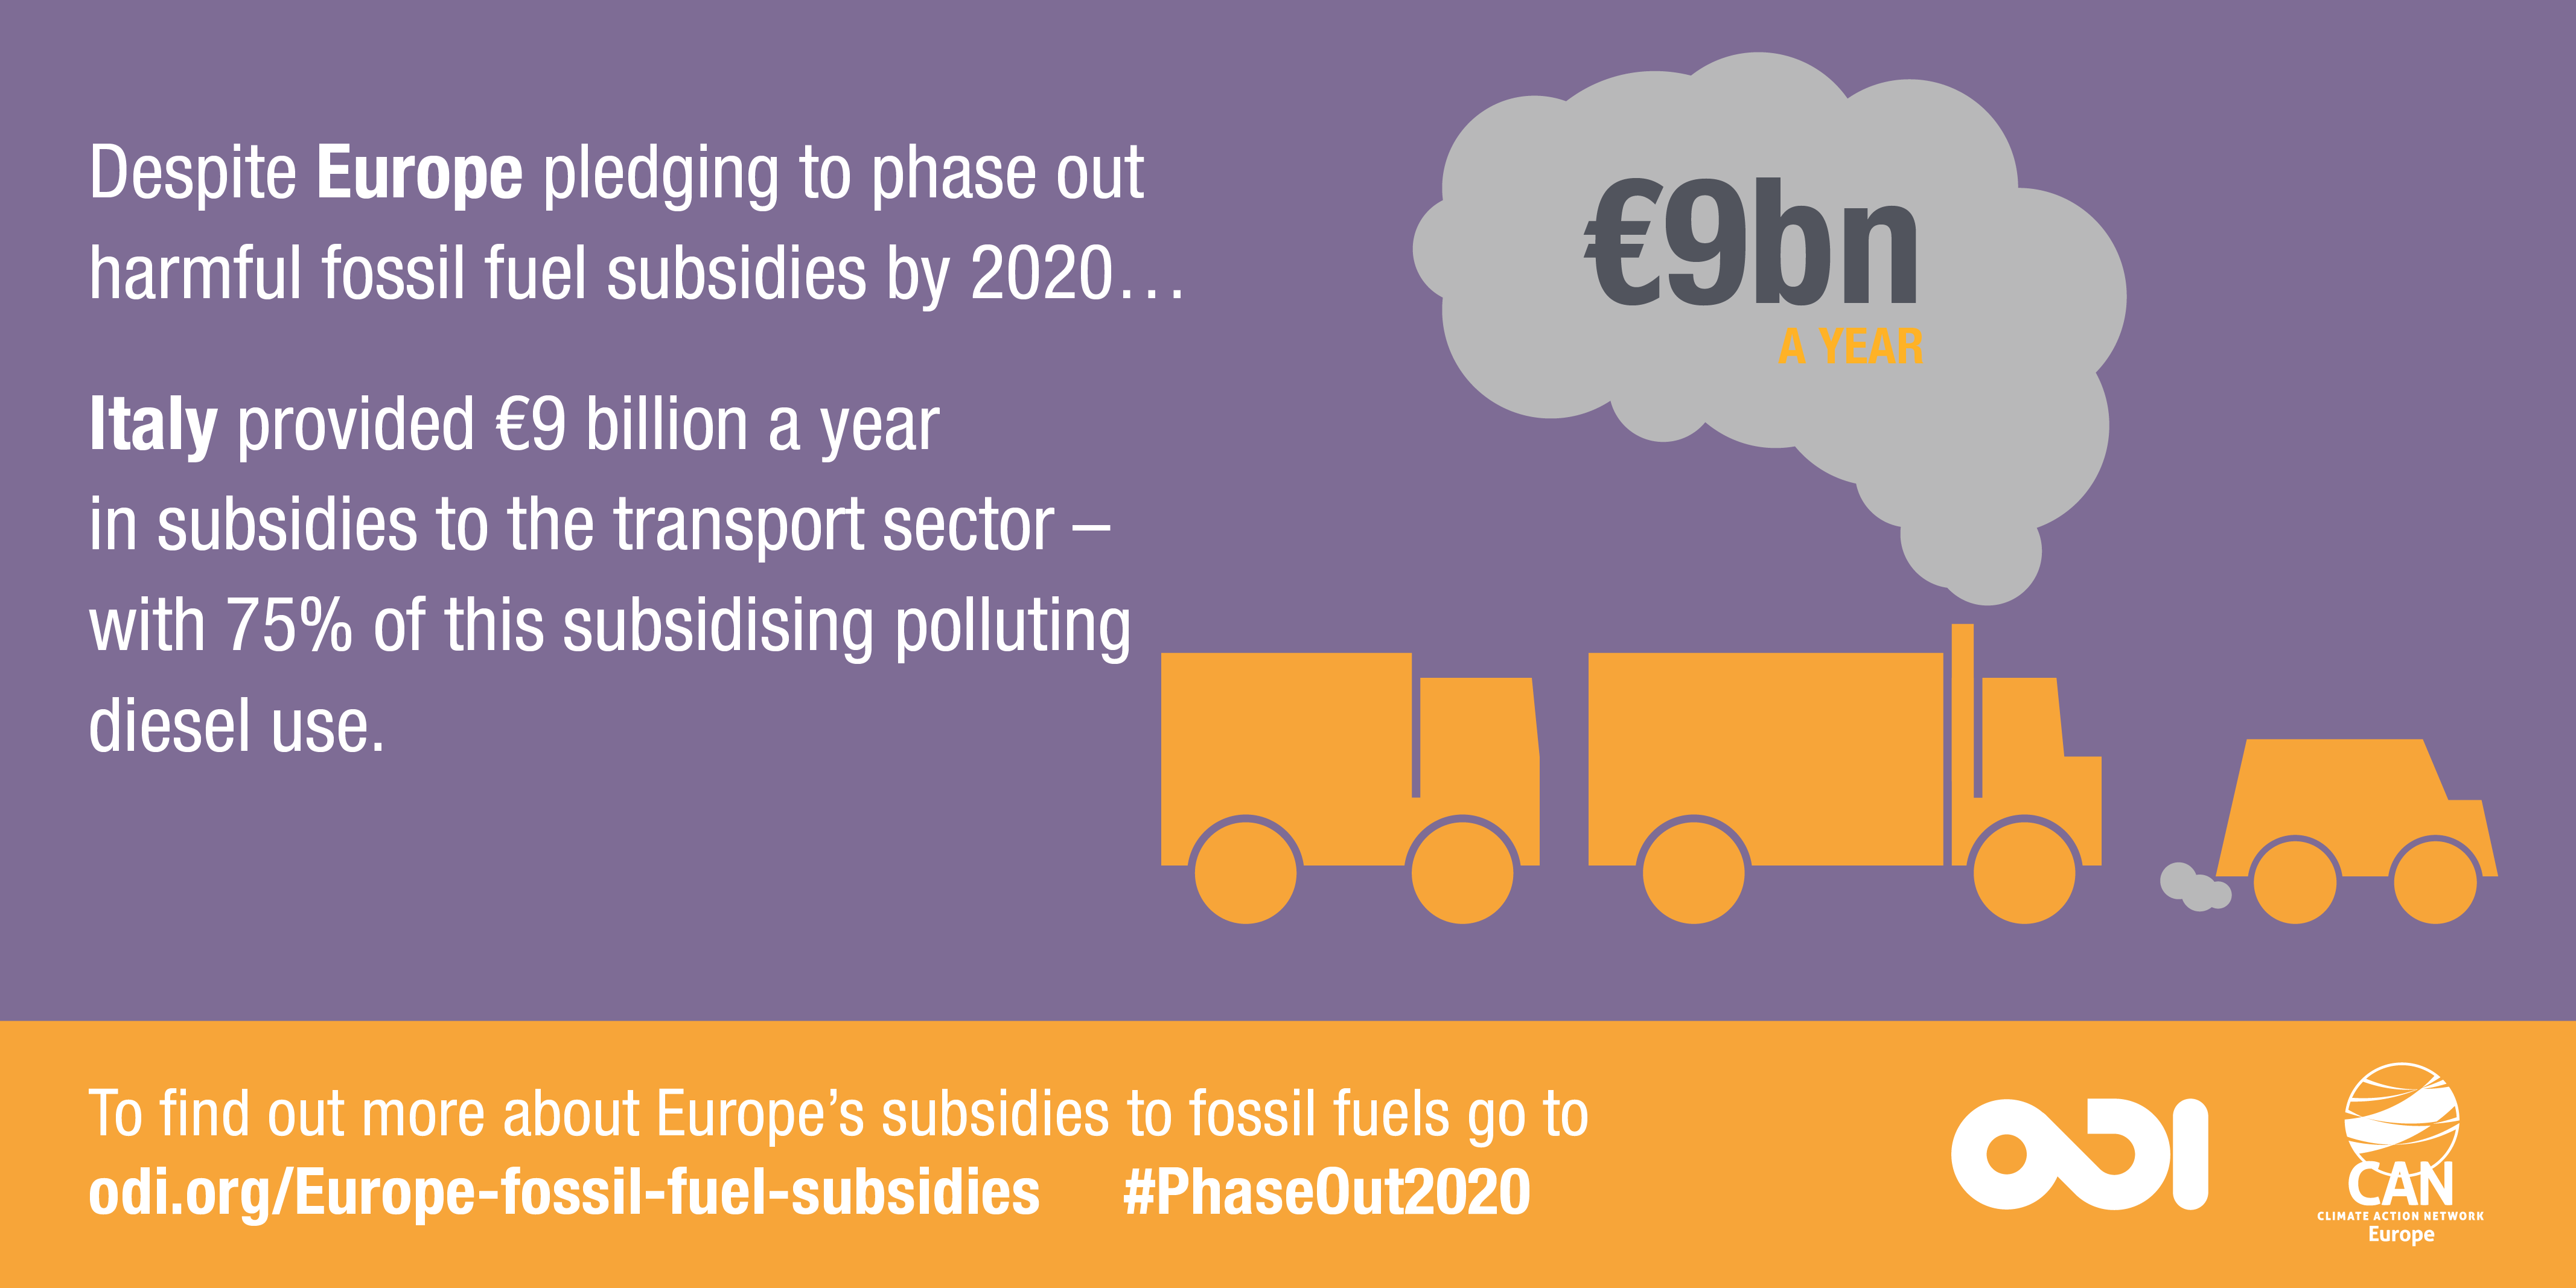 Infographic: Italy provided €9 billion a year in subsidies to the transport sector - with 75% of this subsidising polluting diesel use.